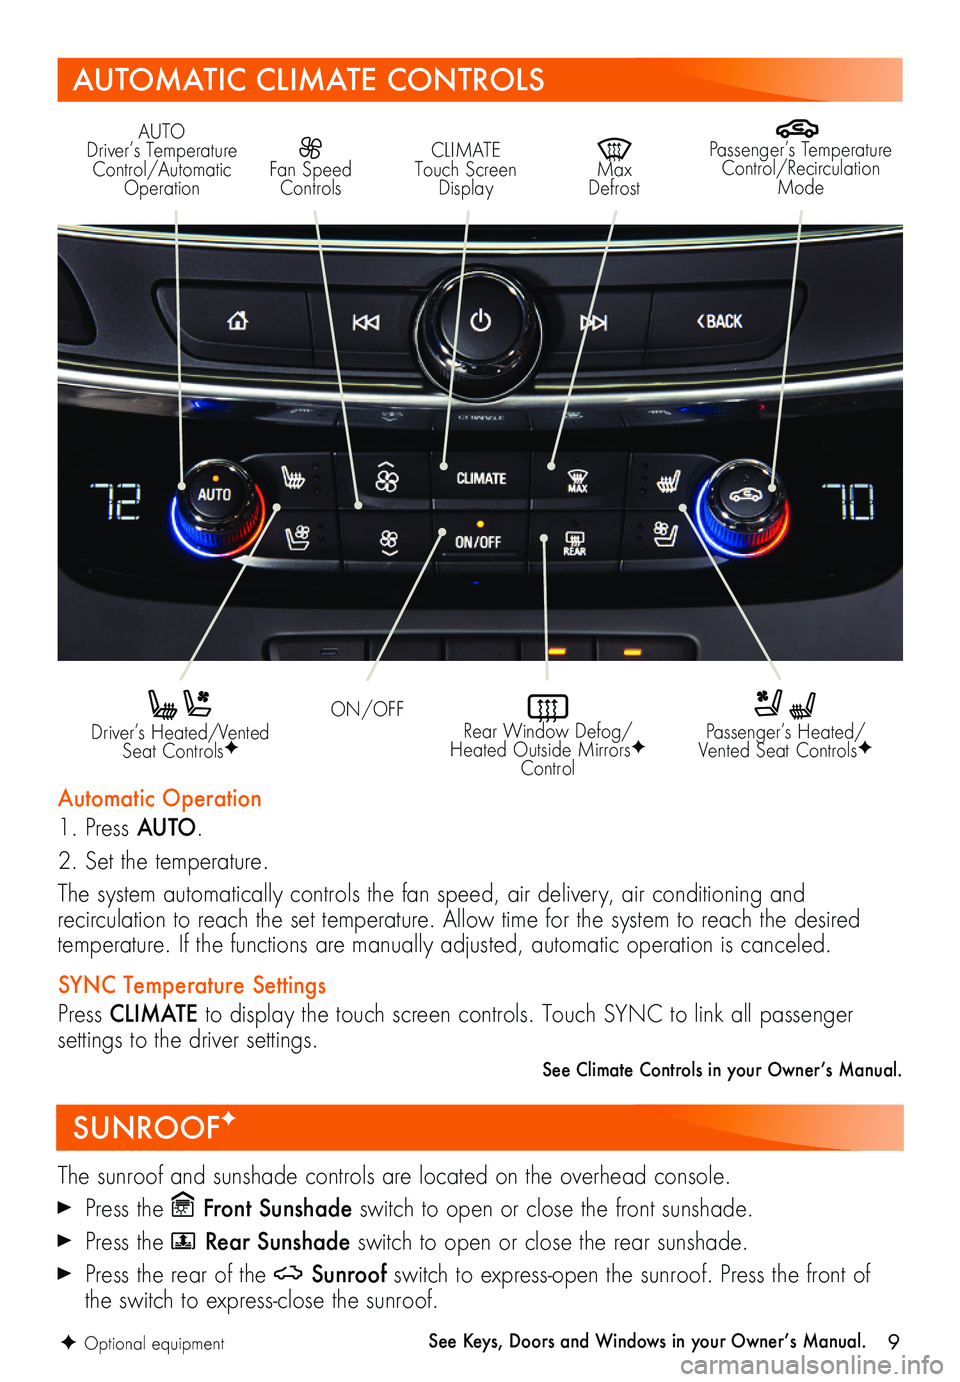 BUICK LACROSSE 2018  Get To Know Guide 9
SUNROOFF
The sunroof and sunshade controls are located on the overhead console.
 Press the Front Sunshade switch to open or close the front sunshade. 
 Press the  Rear Sunshade switch to open or clo